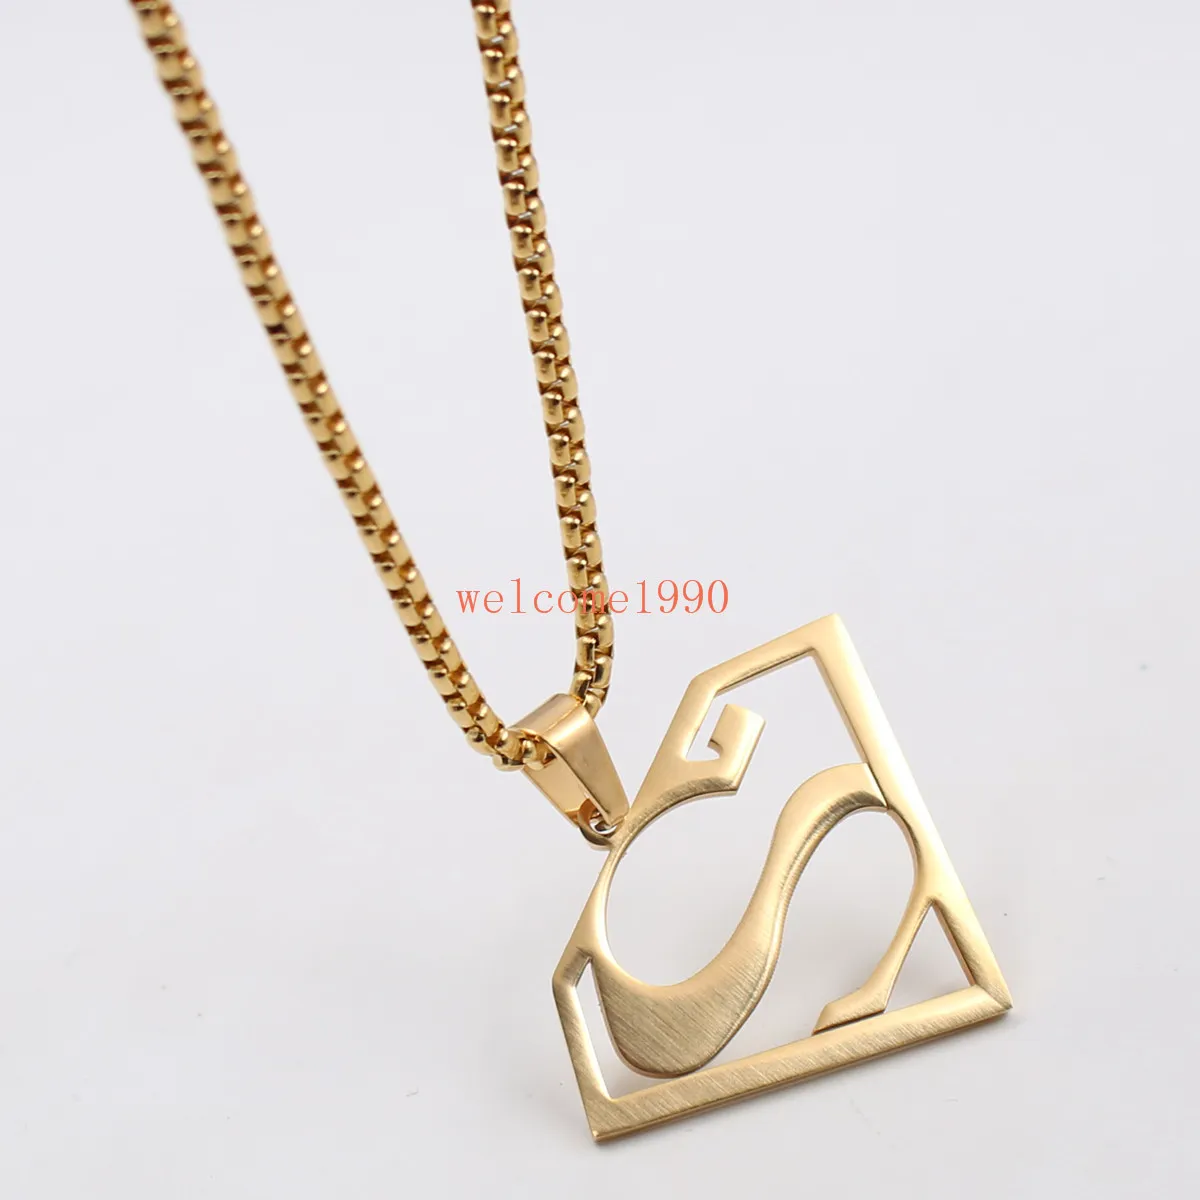 Gold silver black Stainless Steel 15 inch Superman logo Pendant Men039s Gifts Fashion Rolo chain necklace 24 inch lenght9825125